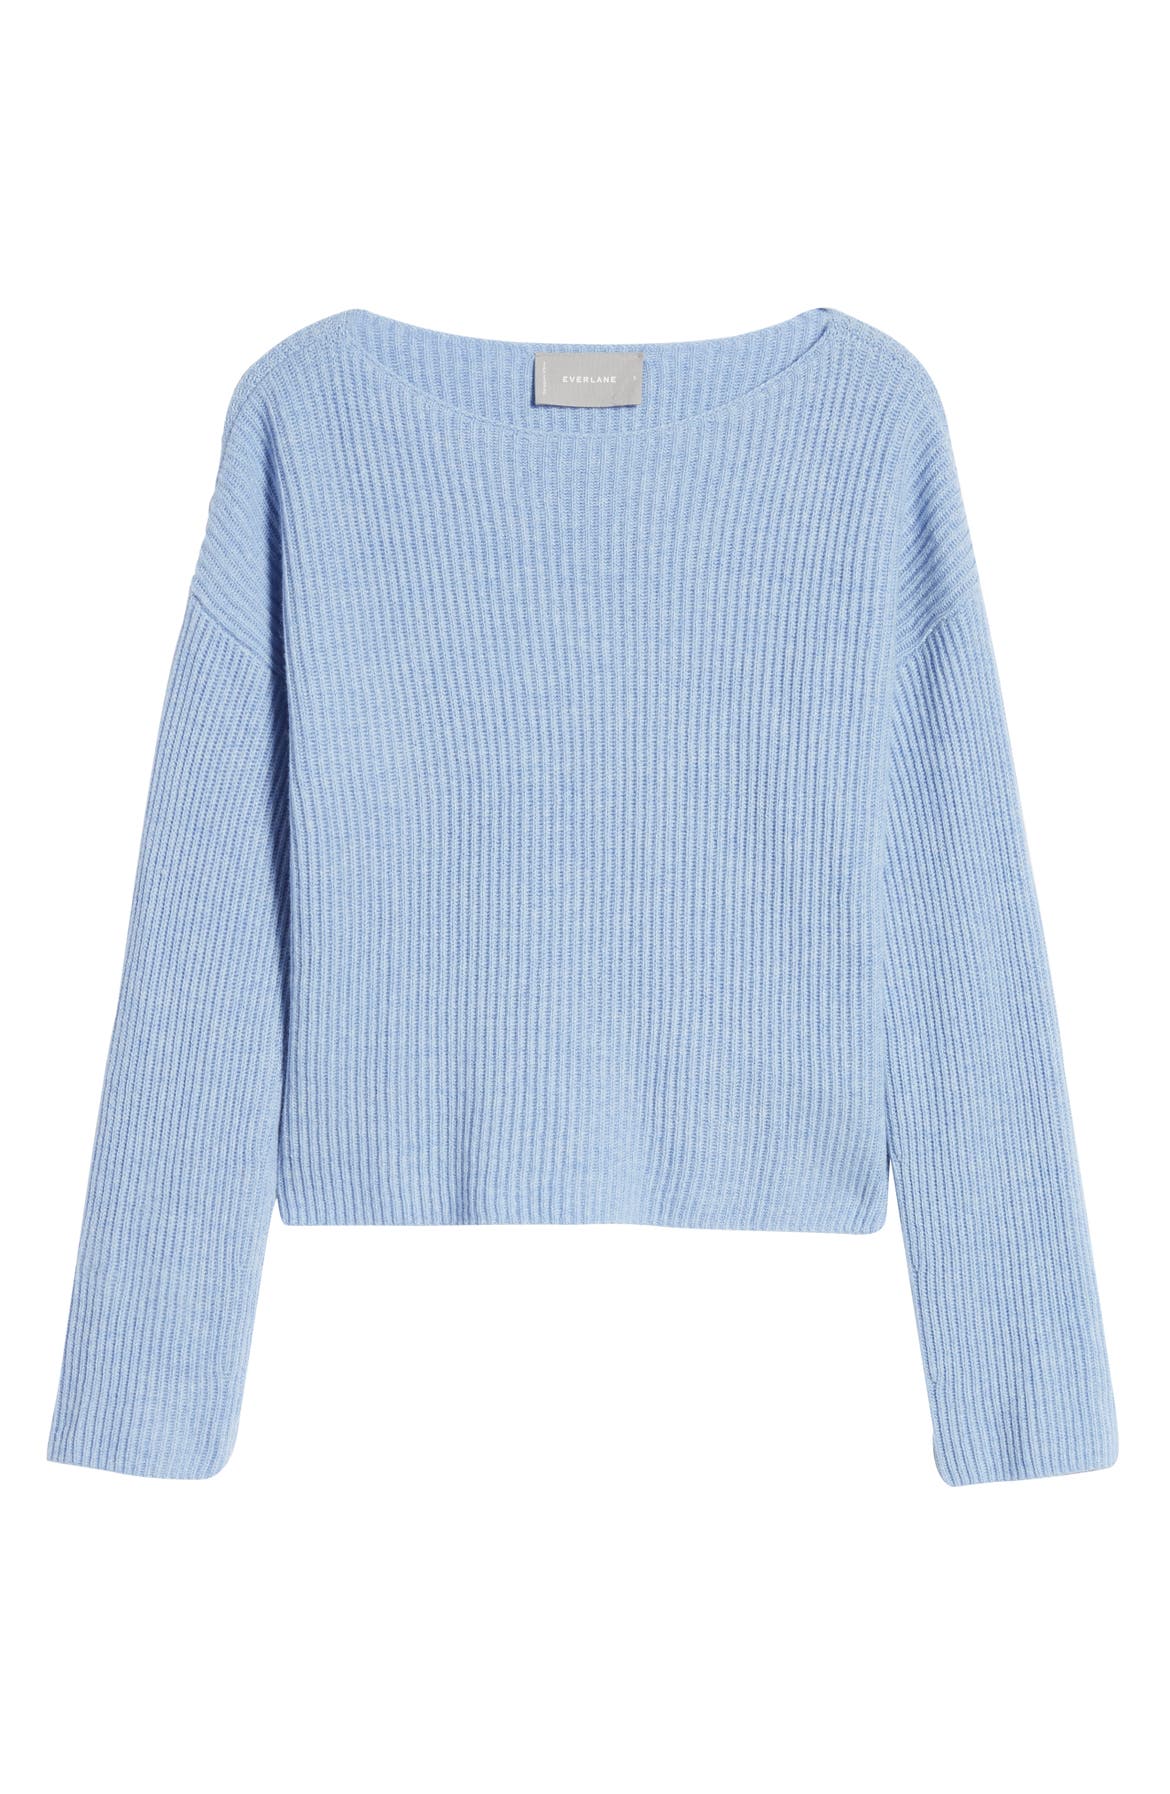 EVERLANE The Cashmere Rib Boatneck Sweater, Main, color, PALE BLUE HEATHER